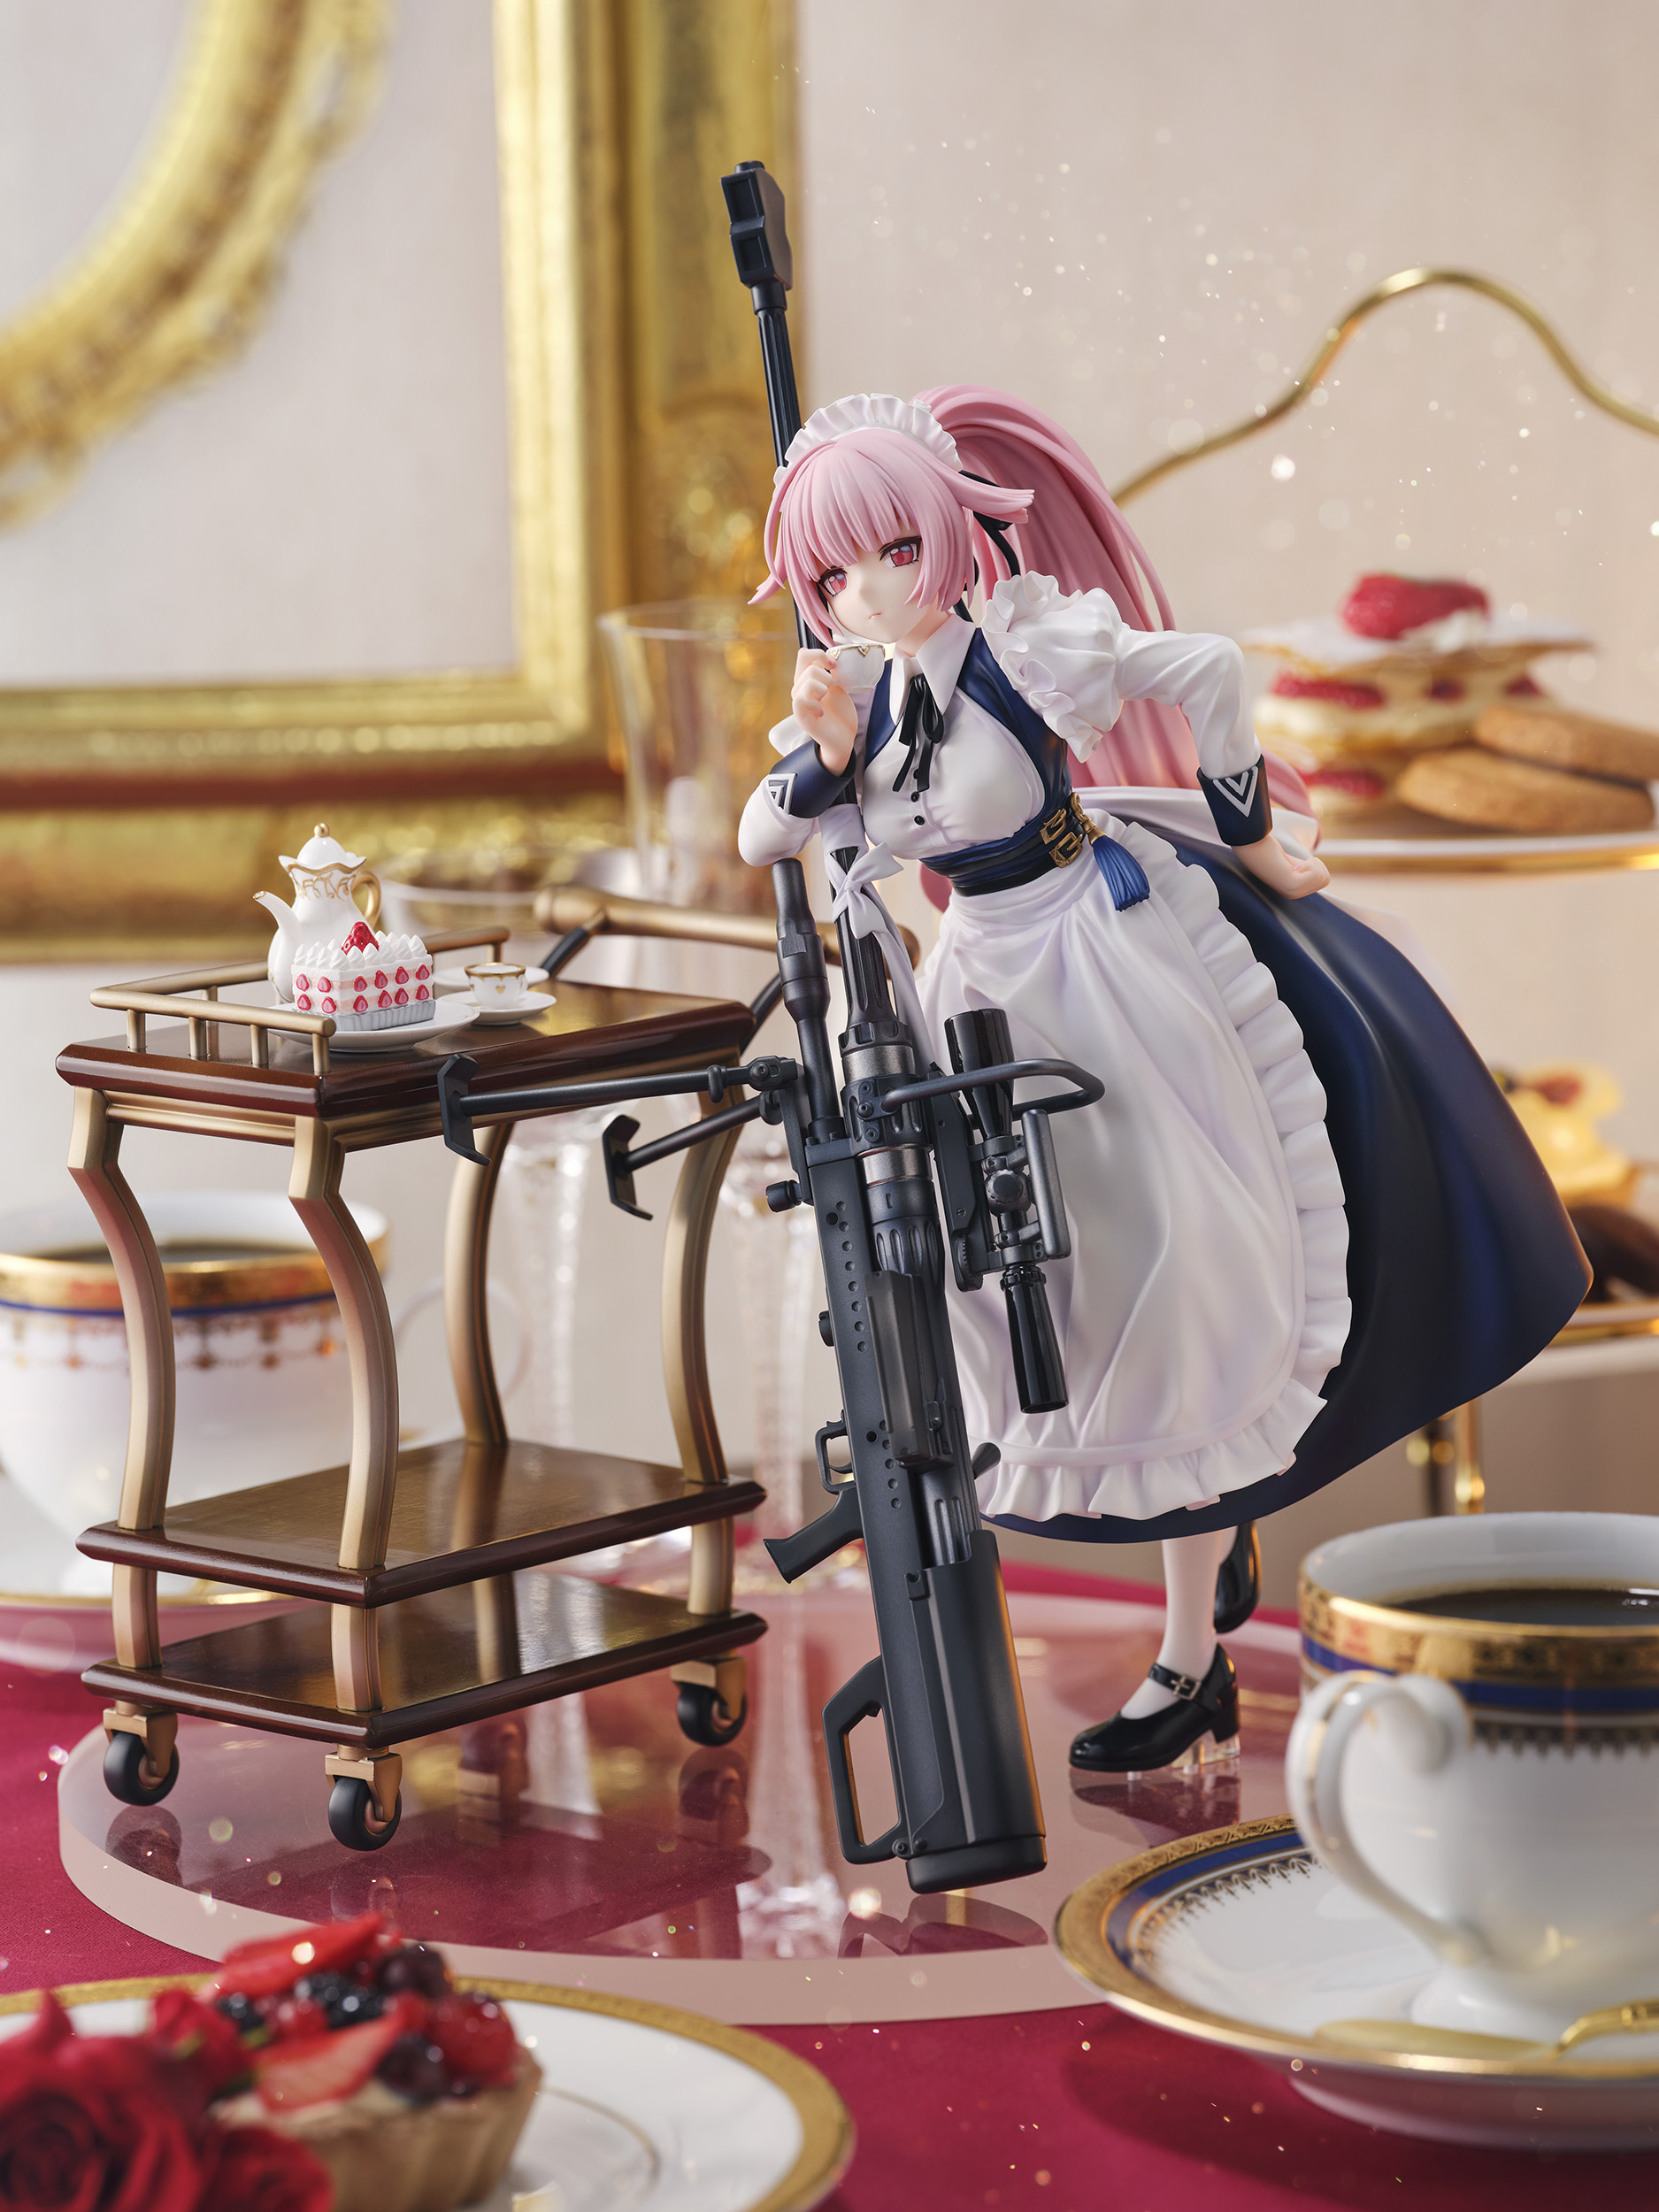 International Smash Hit Mobile Game “Girls’ Frontline“ NTW-20 Aristocrat Experience is Coming Soon as a 1/6 Scale Figure!